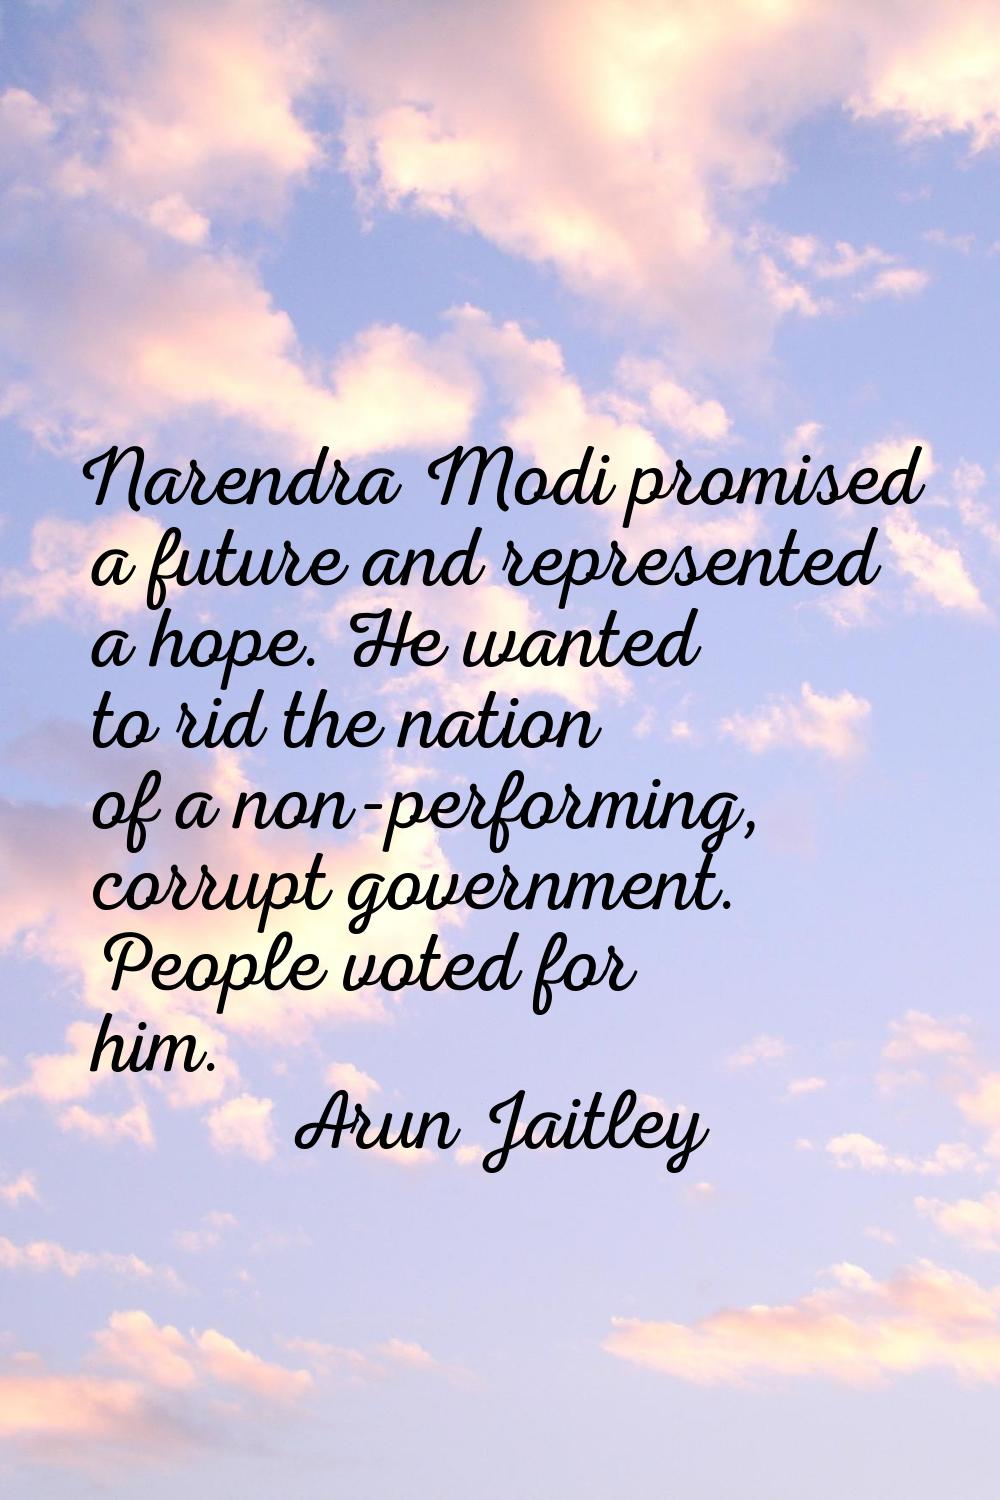 Narendra Modi promised a future and represented a hope. He wanted to rid the nation of a non-perfor